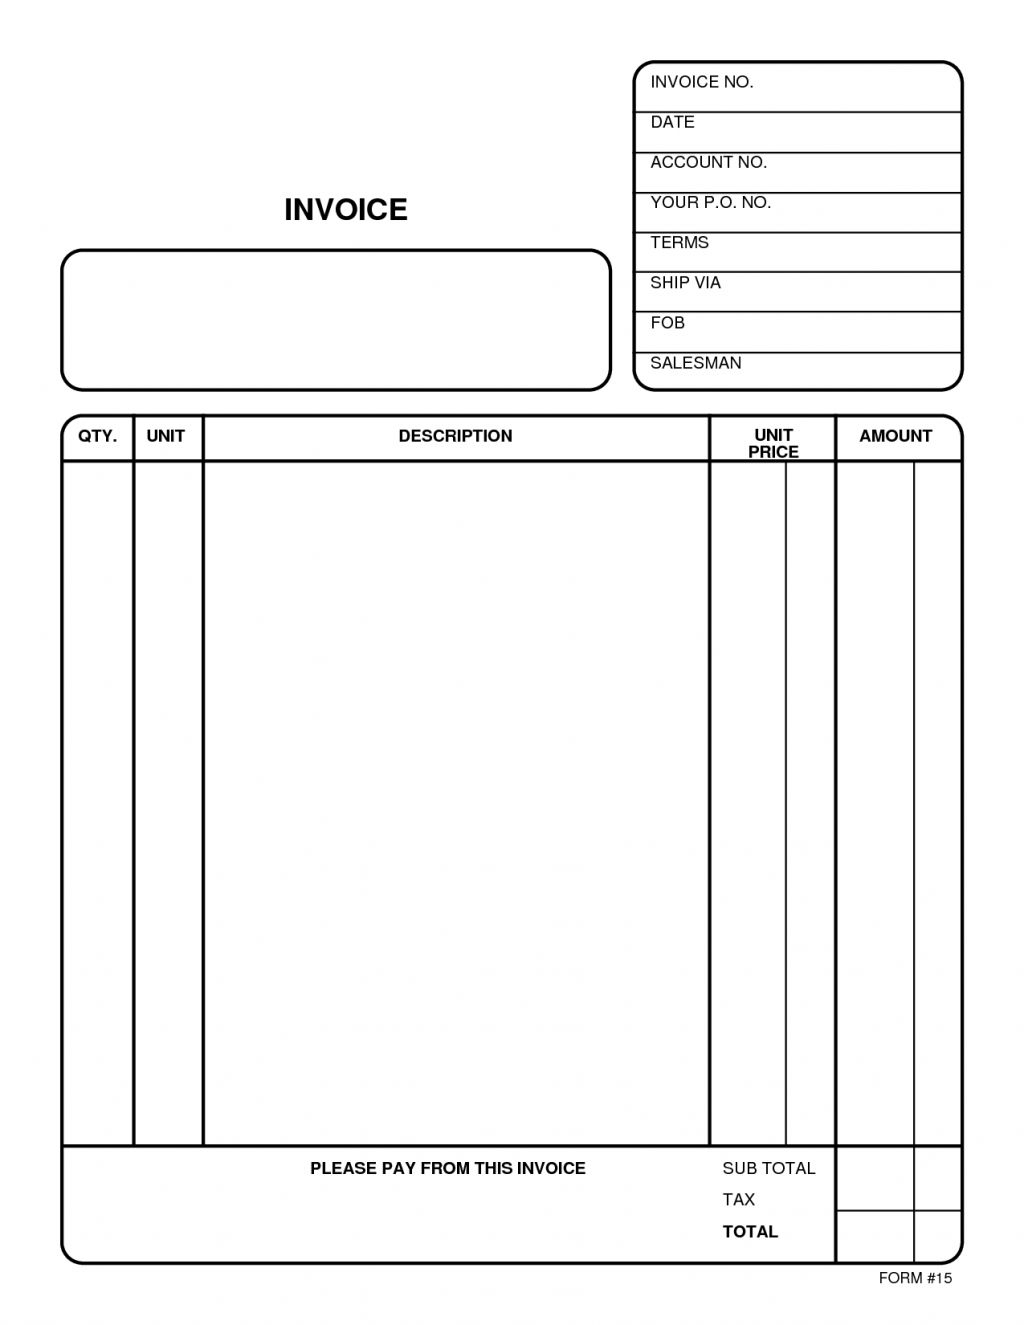 online invoice template bestinvoicexyz invoice template online